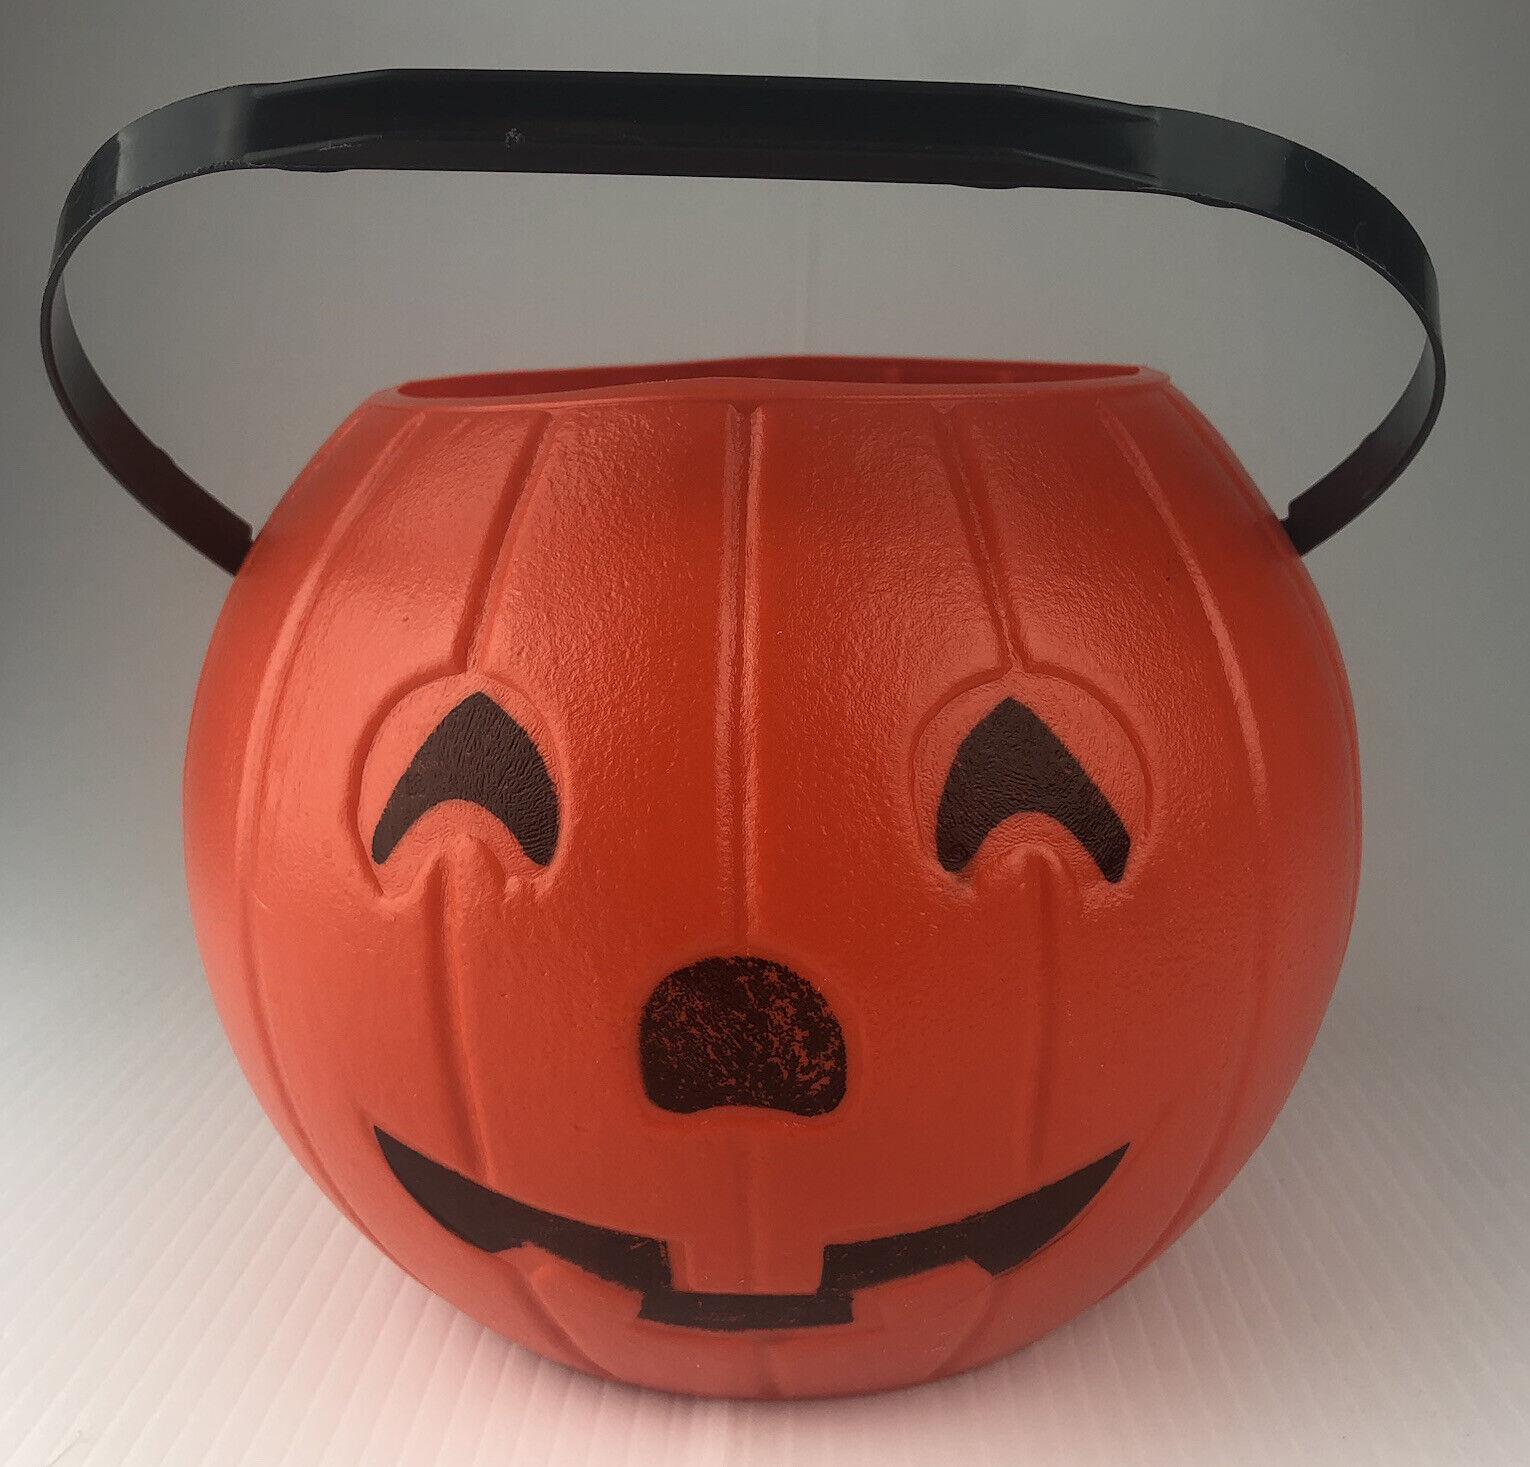 Vintage 1985 Blinky Products Pumpkin Halloween Candy Plastic Pail Bucket 8” Wide